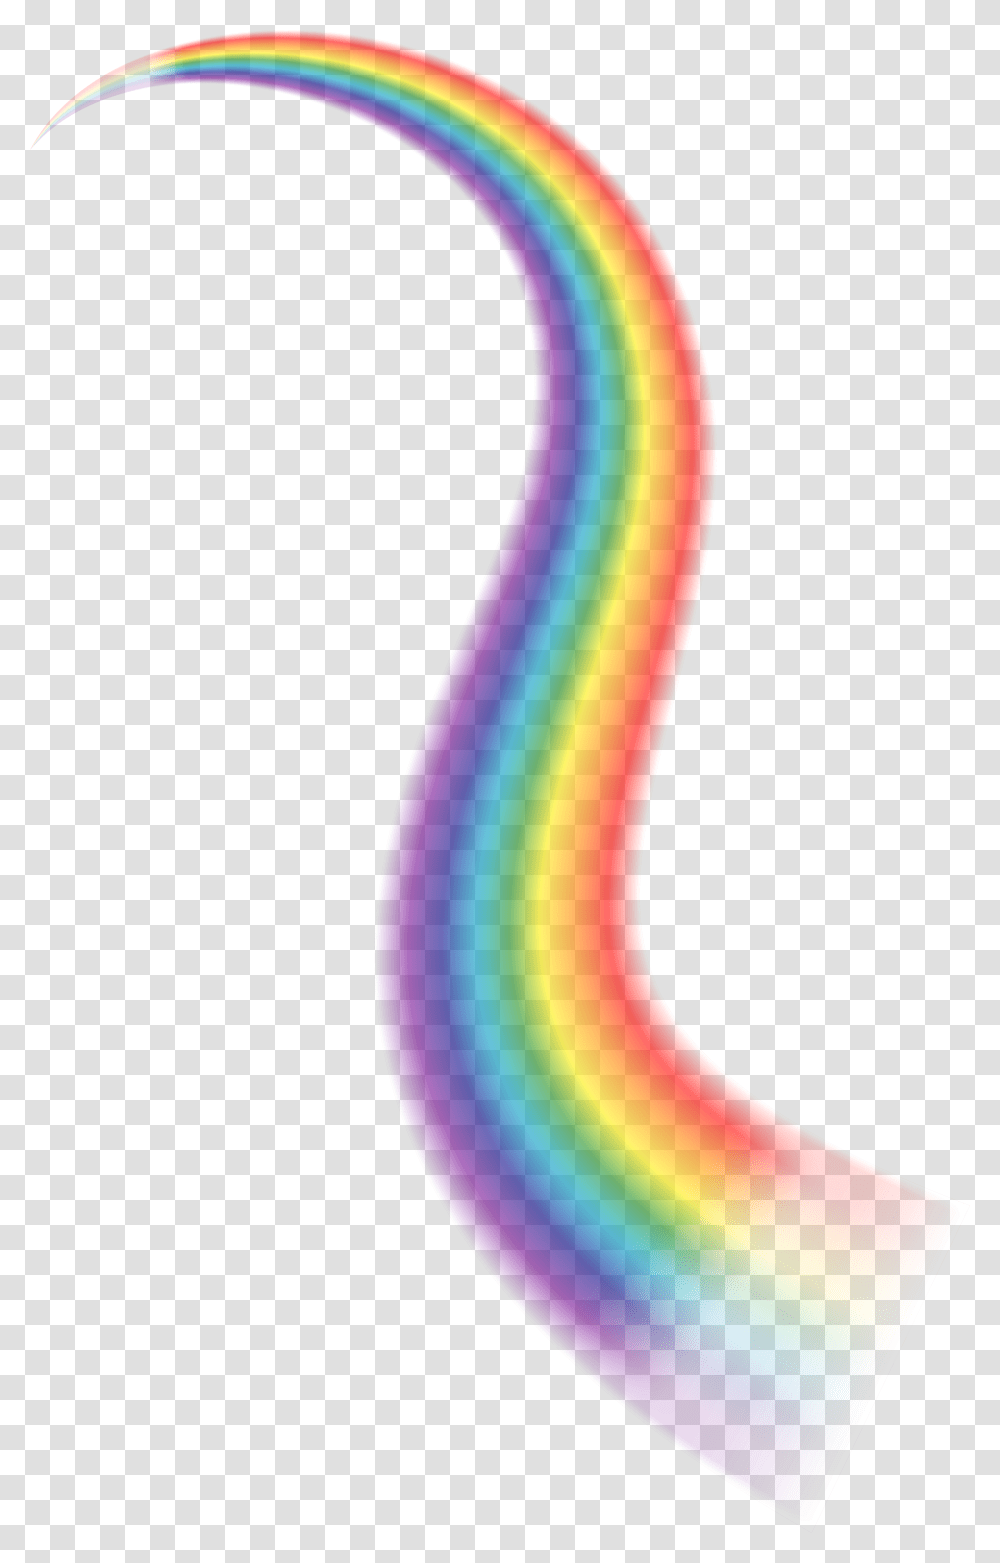 Rainbow Line Clipart Rainbow Line Clipart Transparent Png